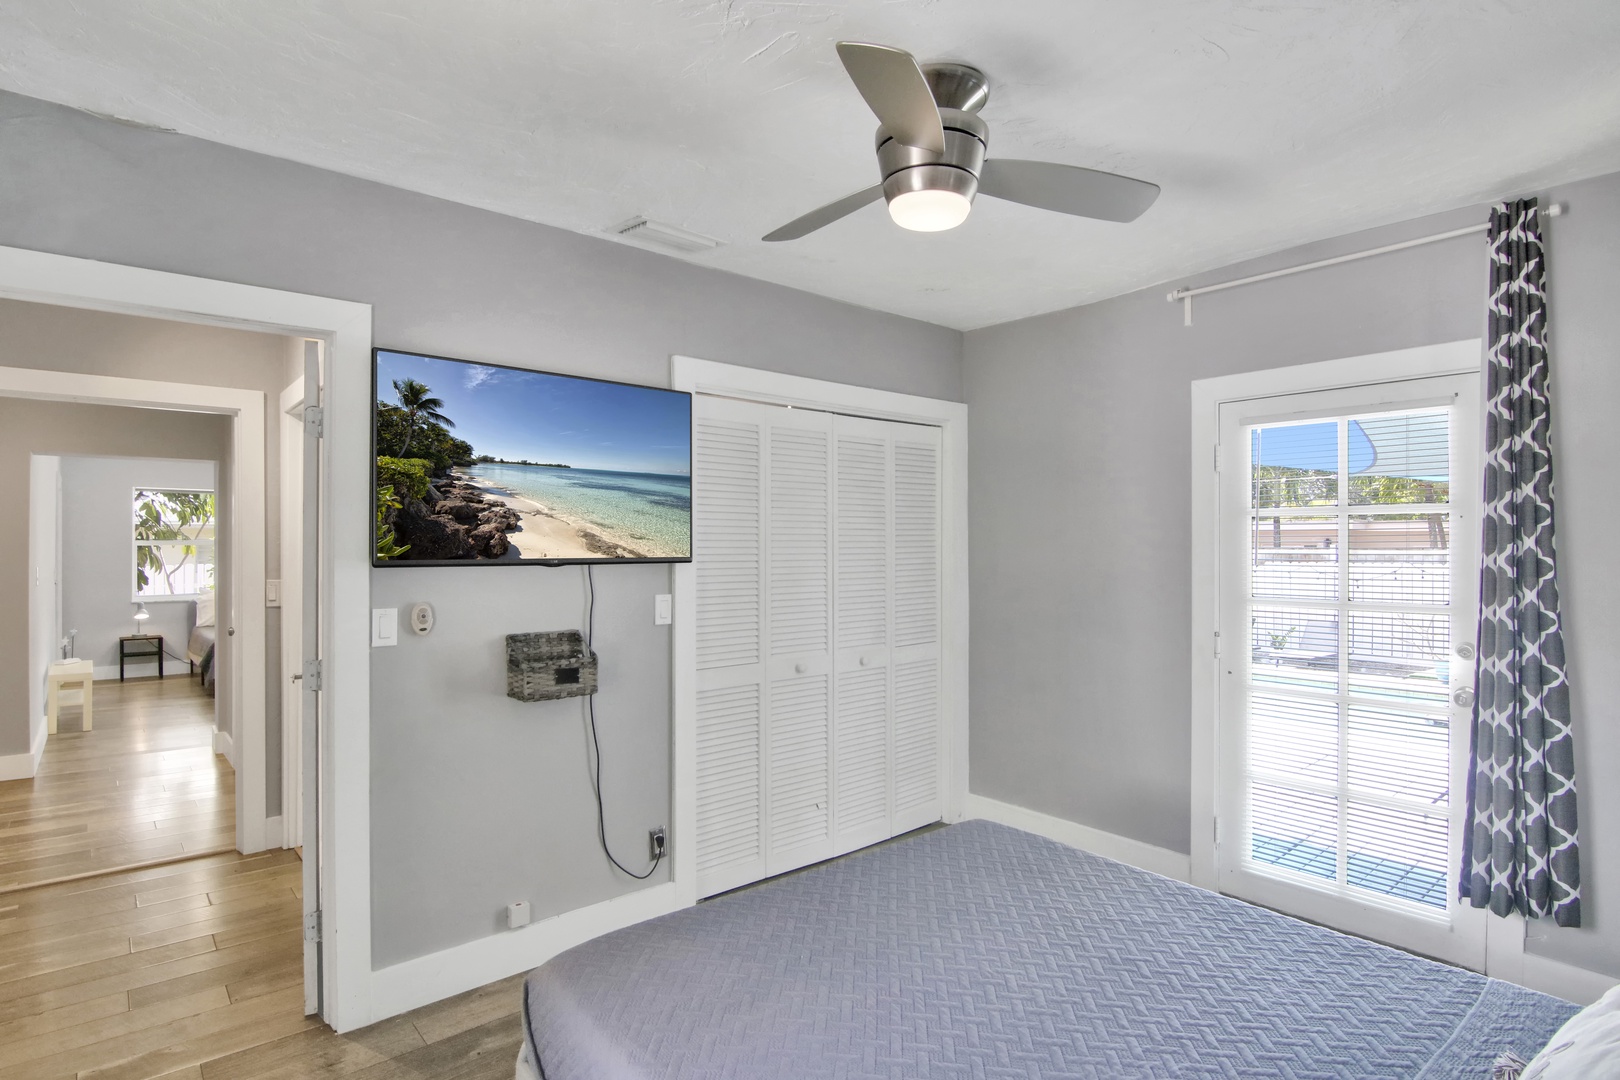 Unit 2: This cozy queen bedroom offers a Smart TV & access to the pool area